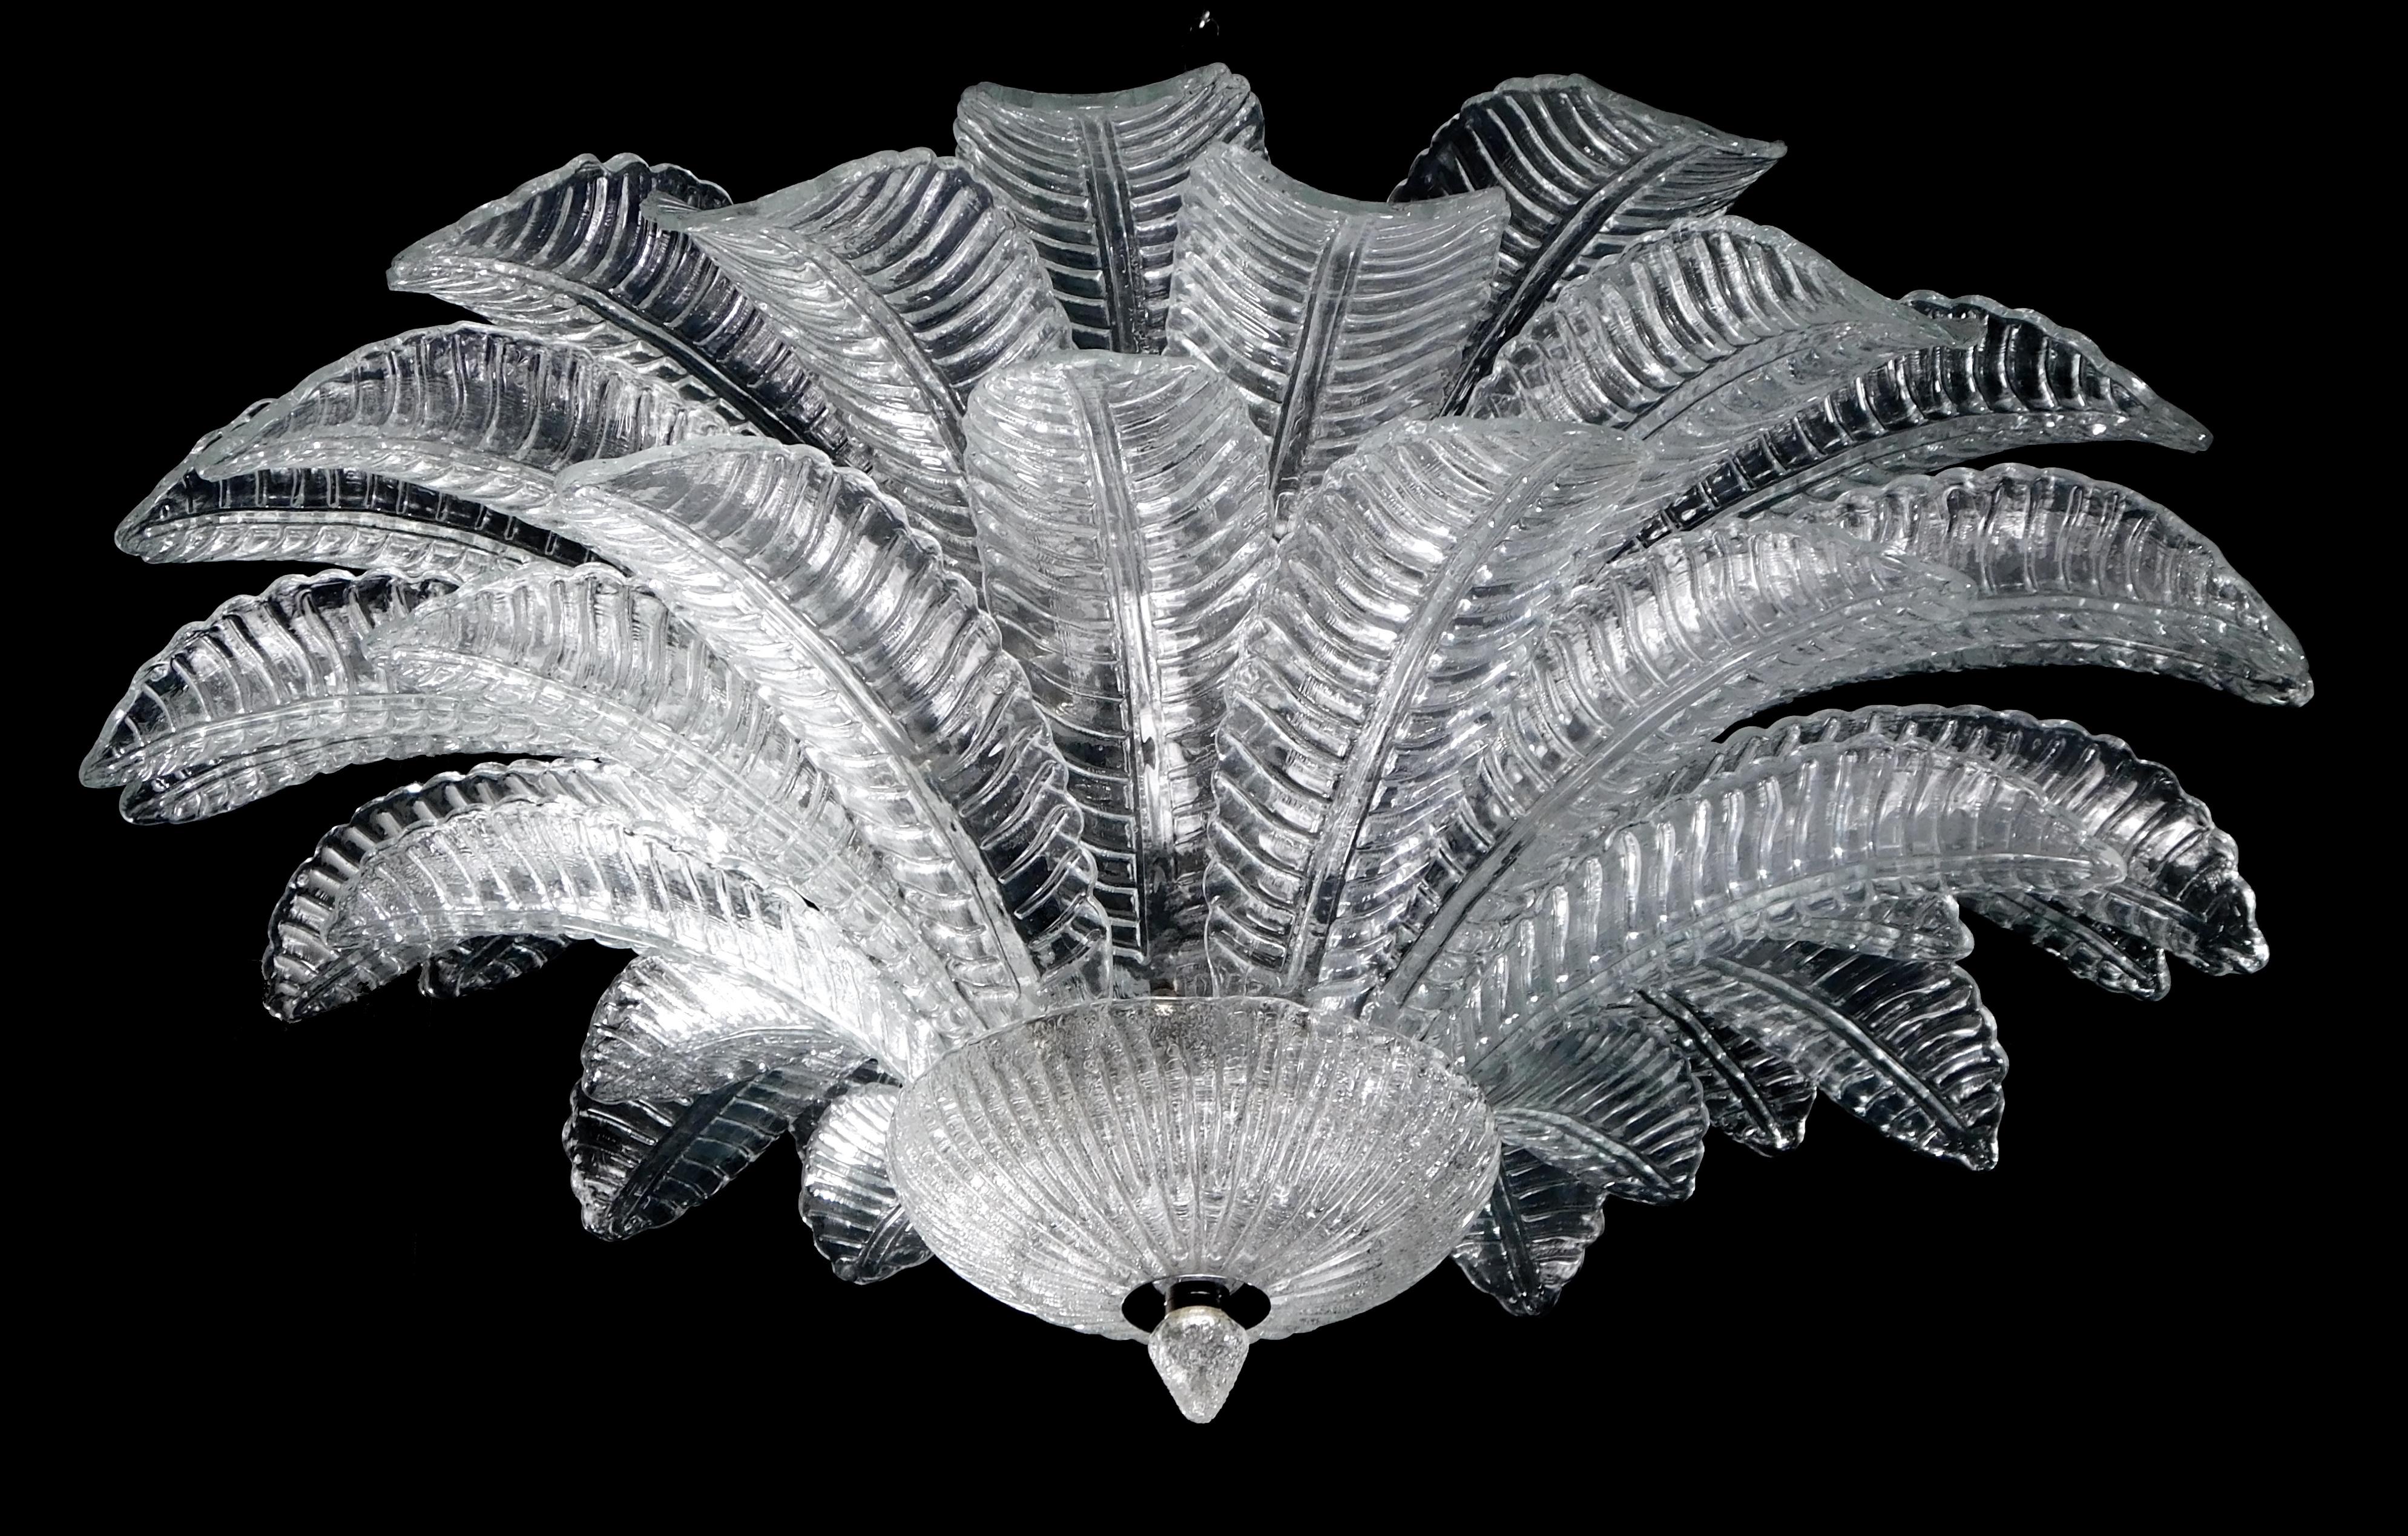 Italian flush mount with clear hand blown Murano Felci fern glass leaves mounted on chrome finish metal frame by Fabio Ltd / Made in Italy
9 lights / E26 or E27 type / max 60W each
Measures: Diameter 39.5 inches, height 18 inches
Order only / this